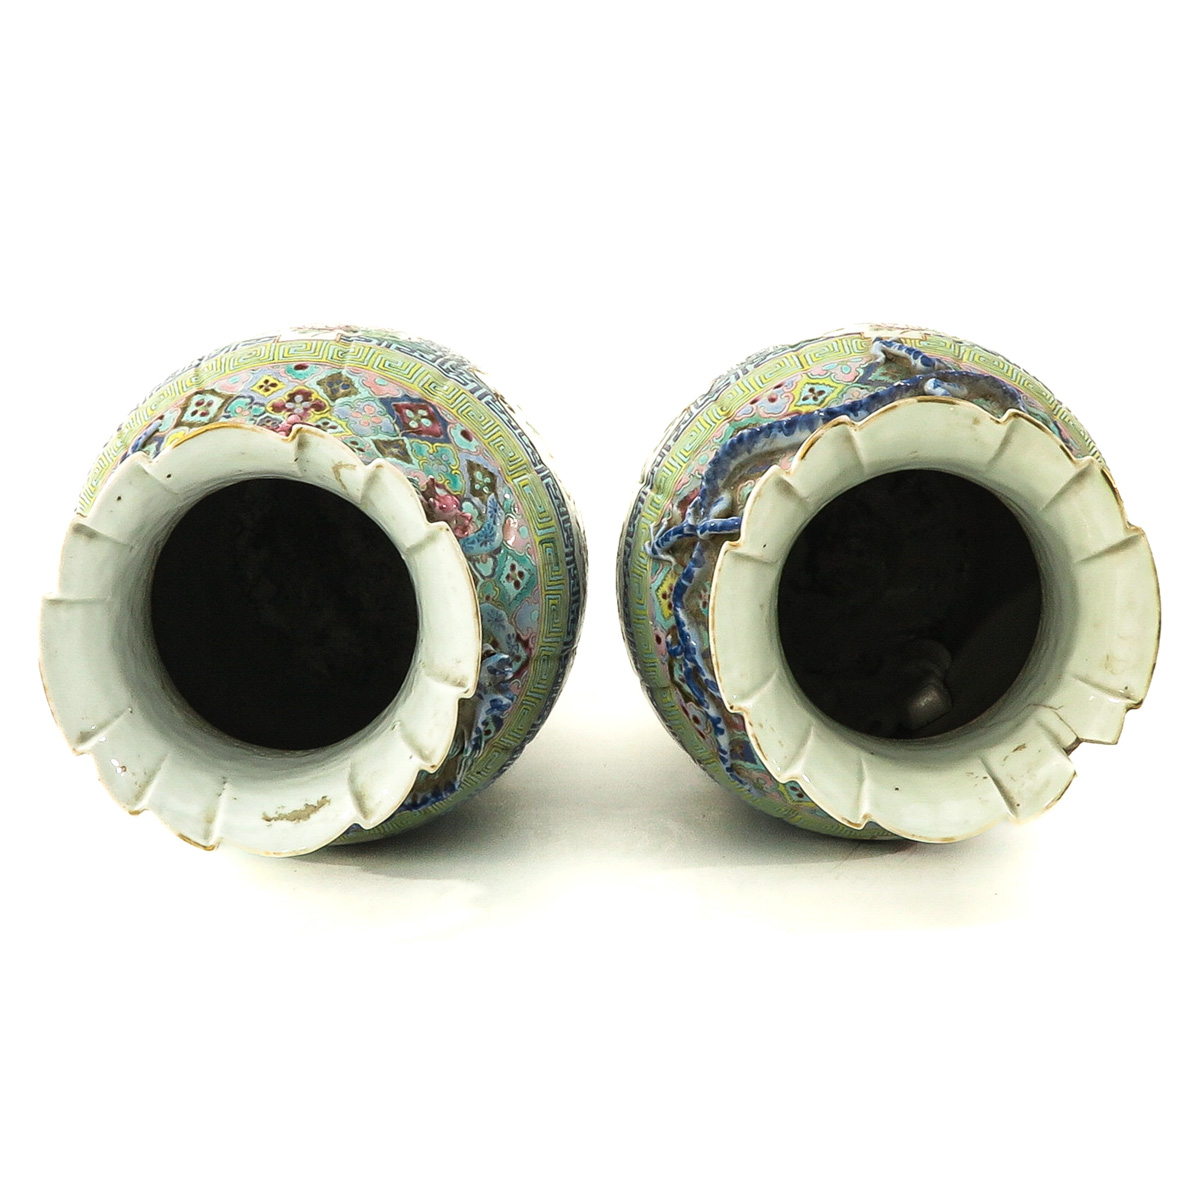 A Pair of Famille Rose Vases - Image 5 of 9